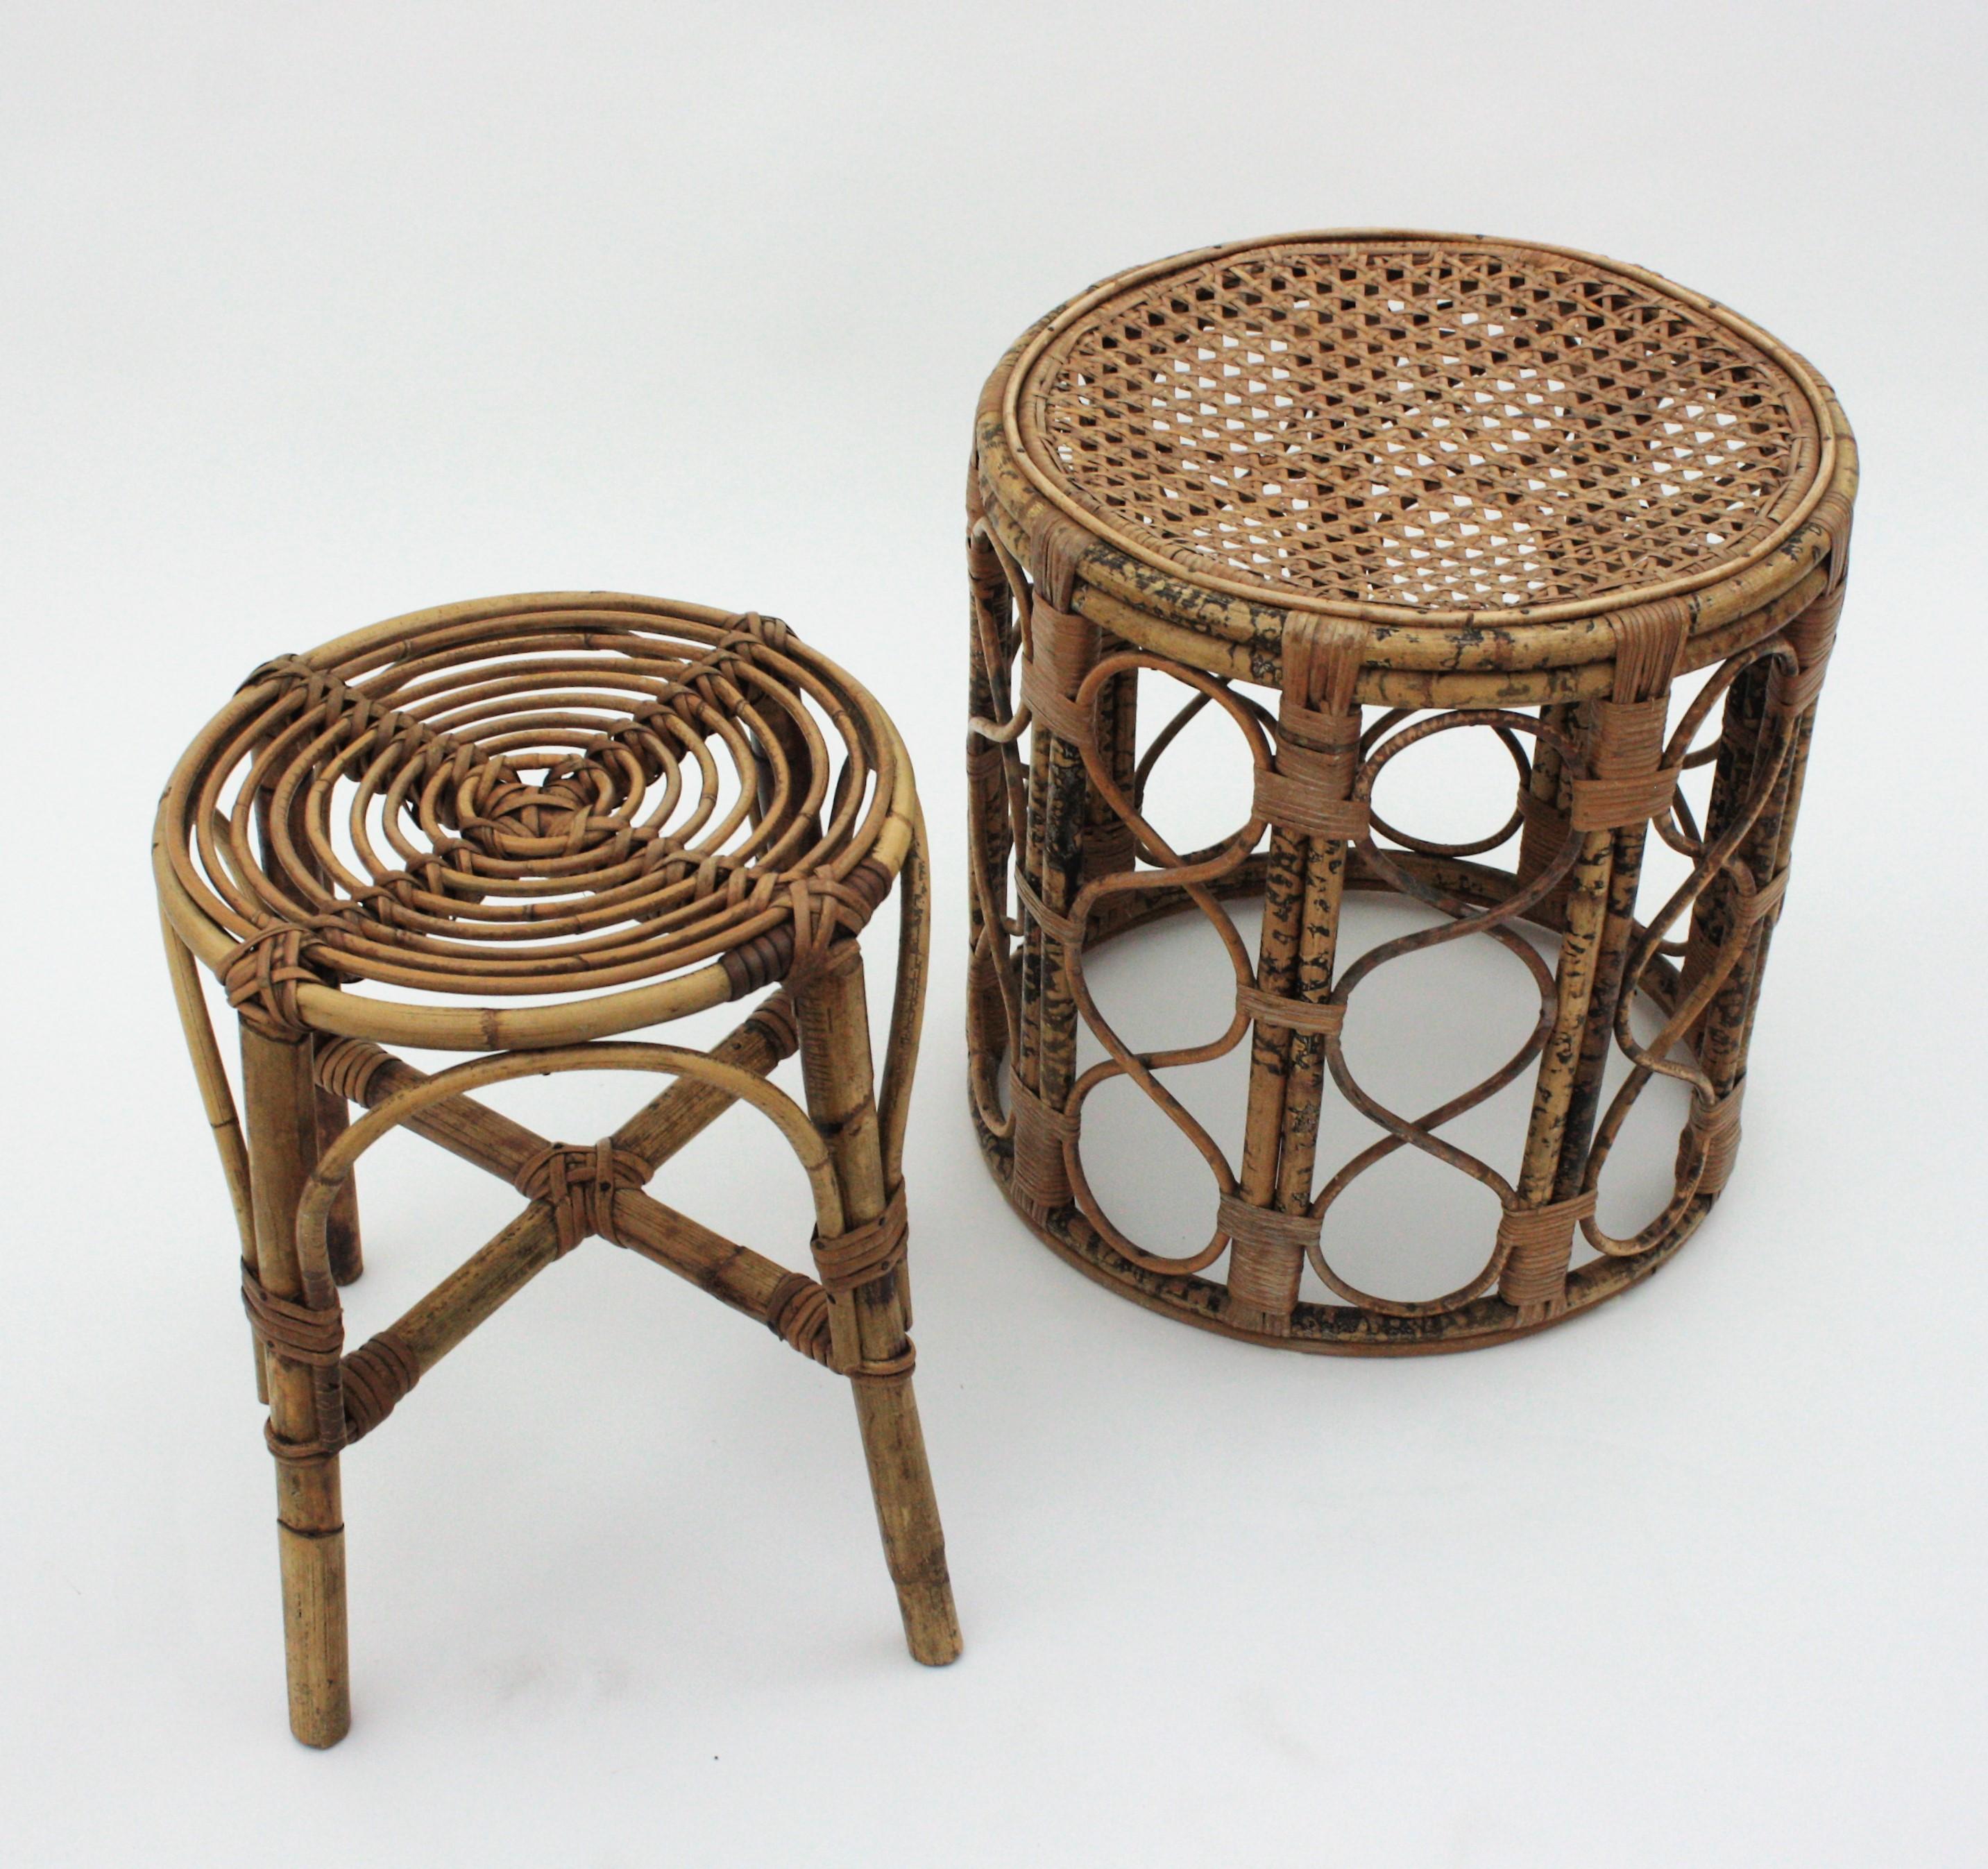 French Side Table or Stool in Tiger Bamboo Rattan with Woven Wicker Top, 1940s For Sale 5